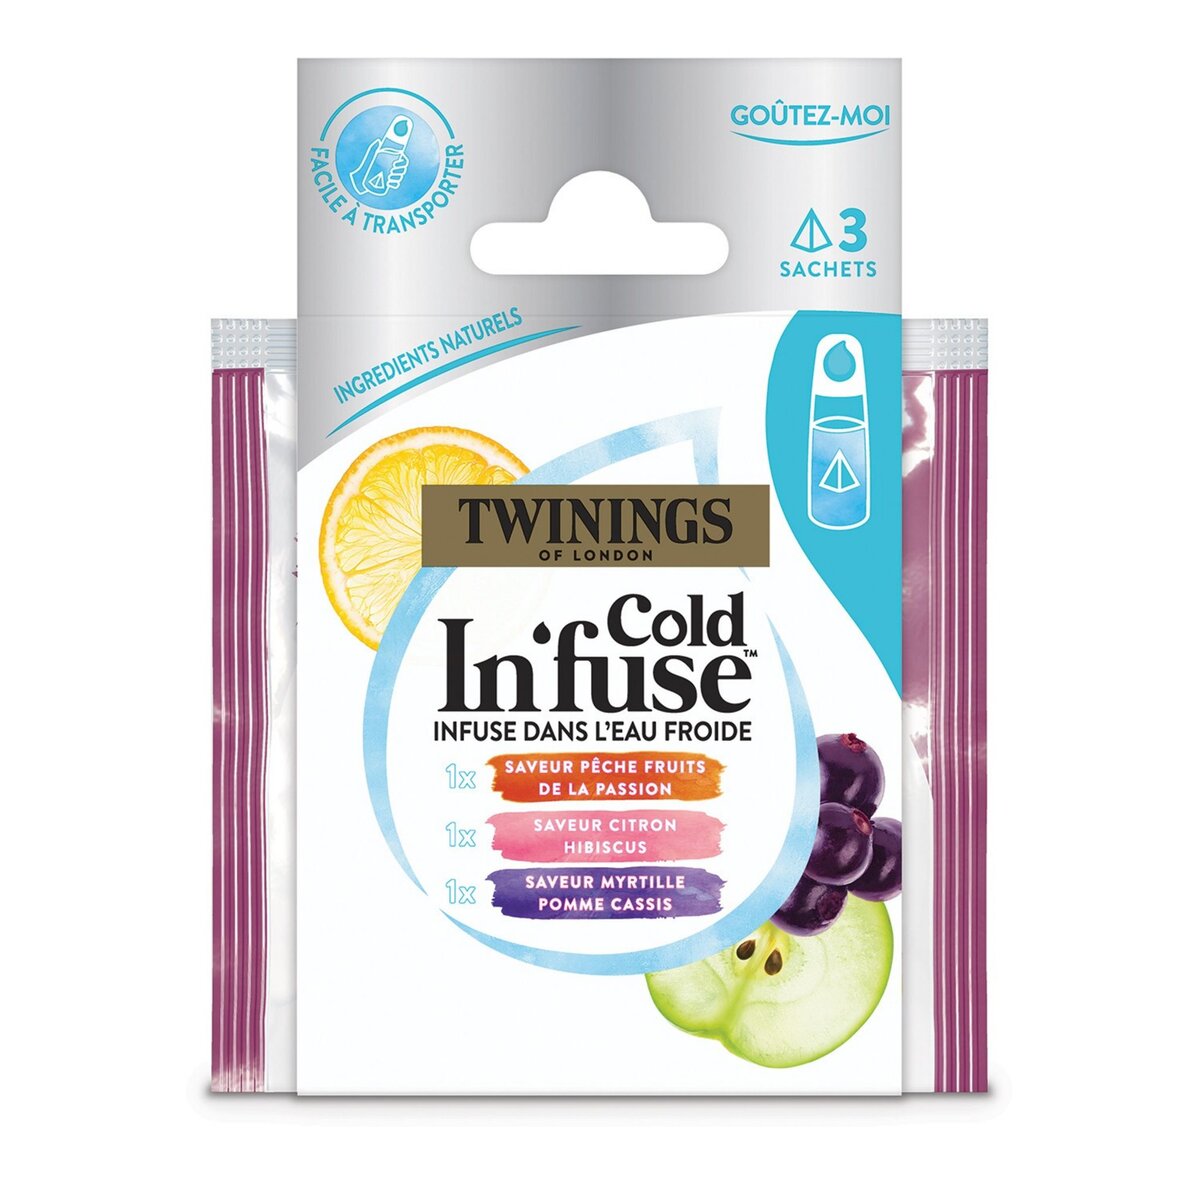 TWININGS Cold infuse assortiment d'infusion à froid  3 sachets 7,5g